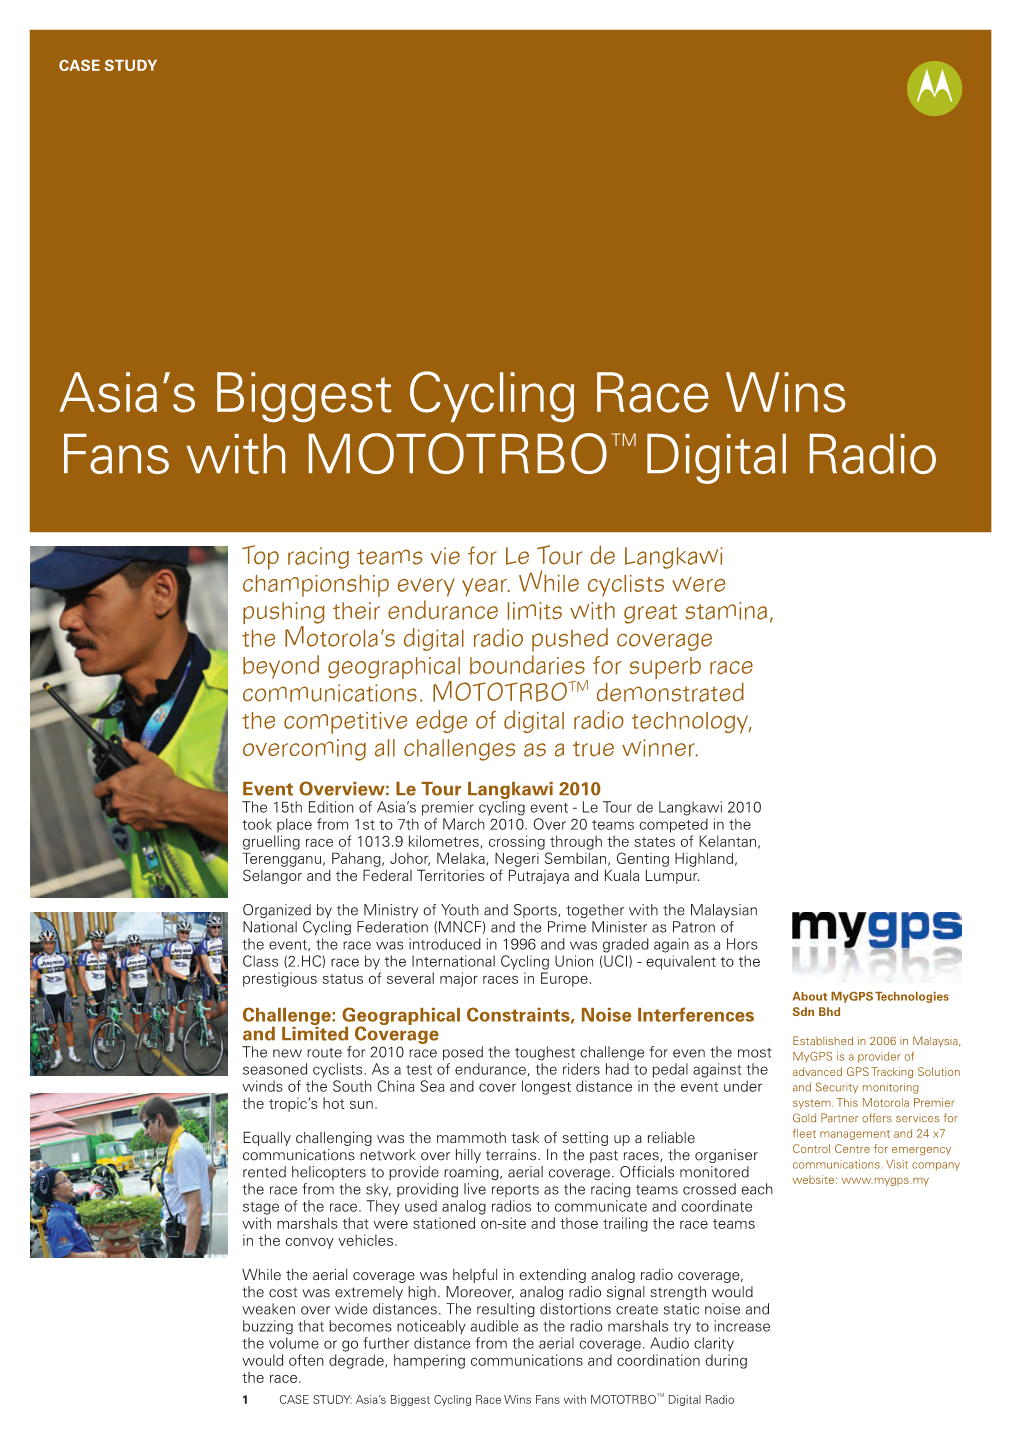 Asia's Biggest Cycling Race Wins Fans with MOTOTRBOTM Digital Radio